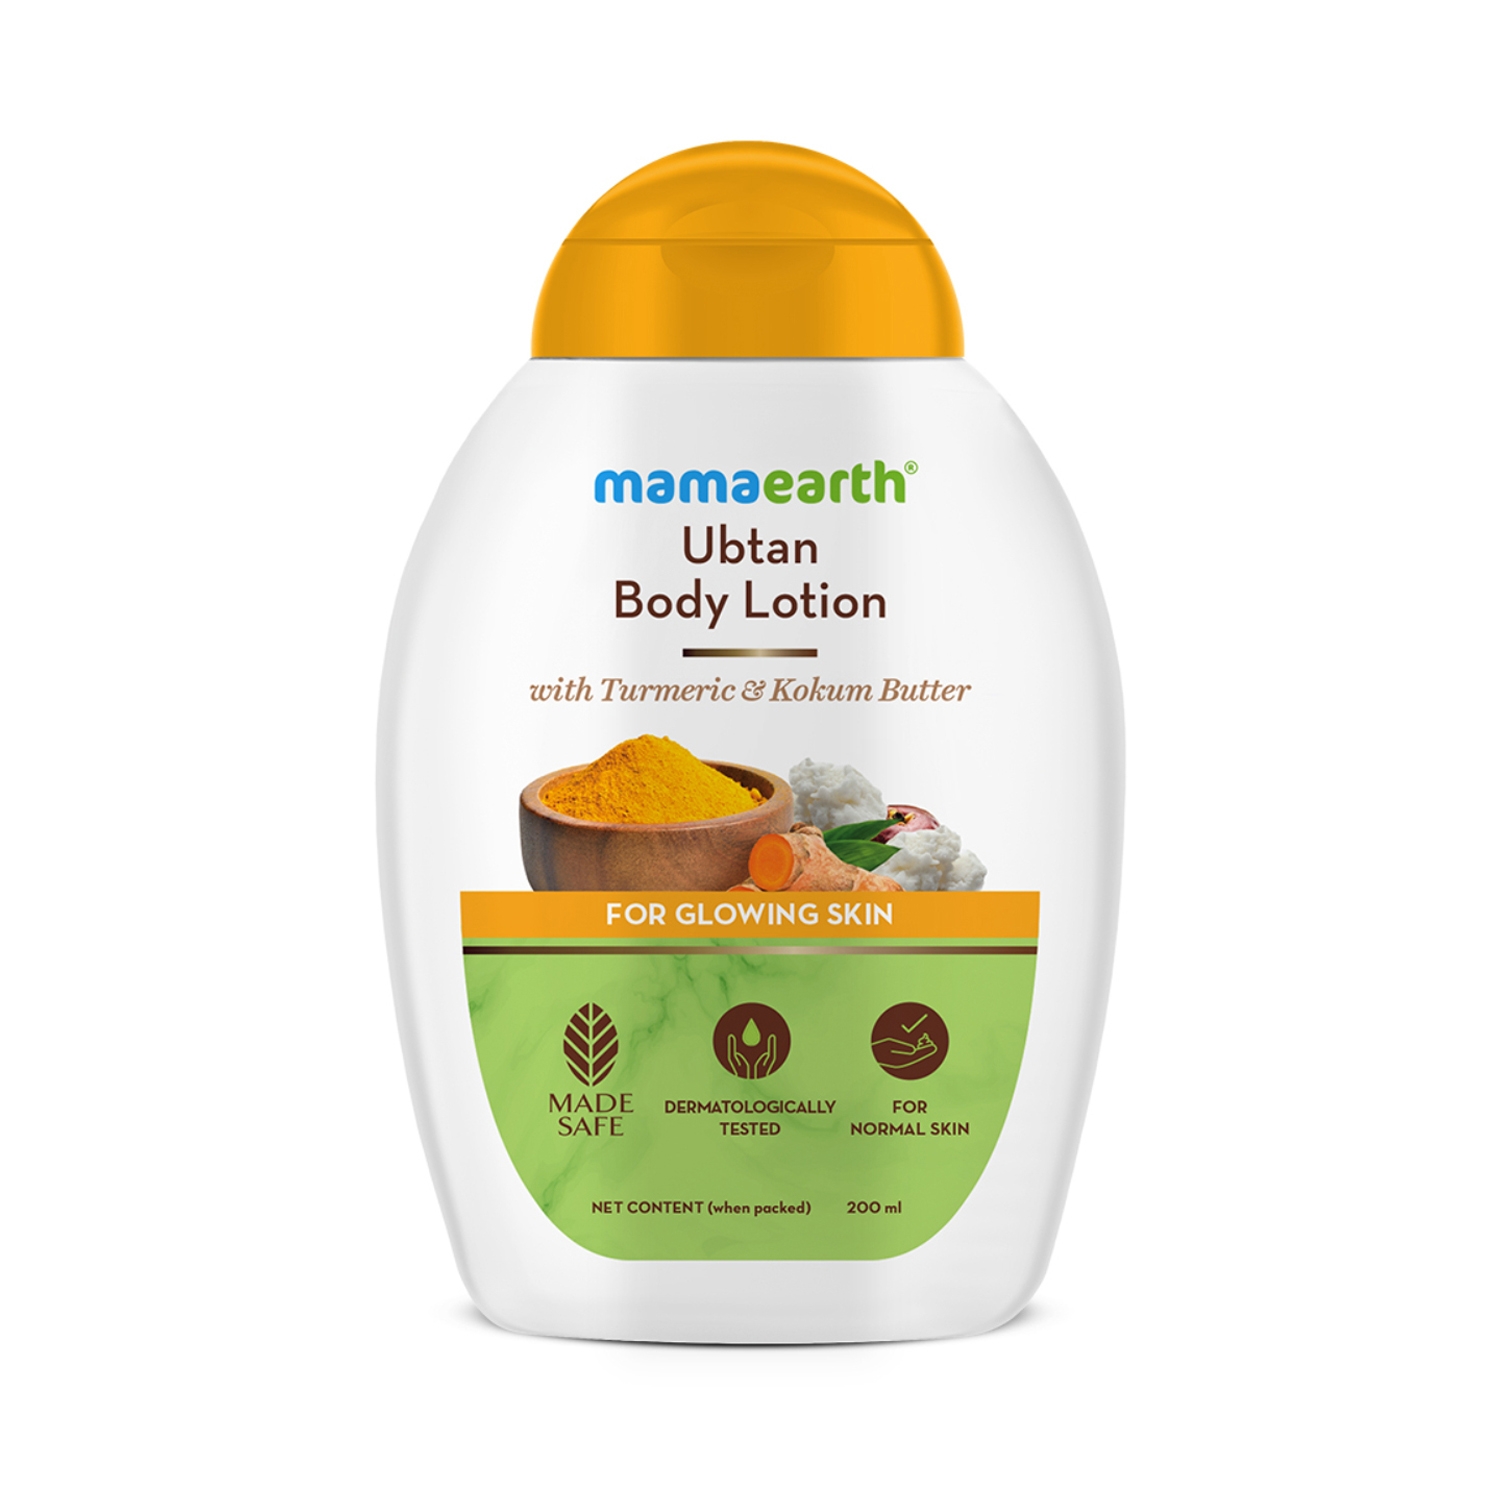 Mamaearth Ubtan Body Lotion With Turmeric & Kokum Butter For Glowing Skin (200ml)